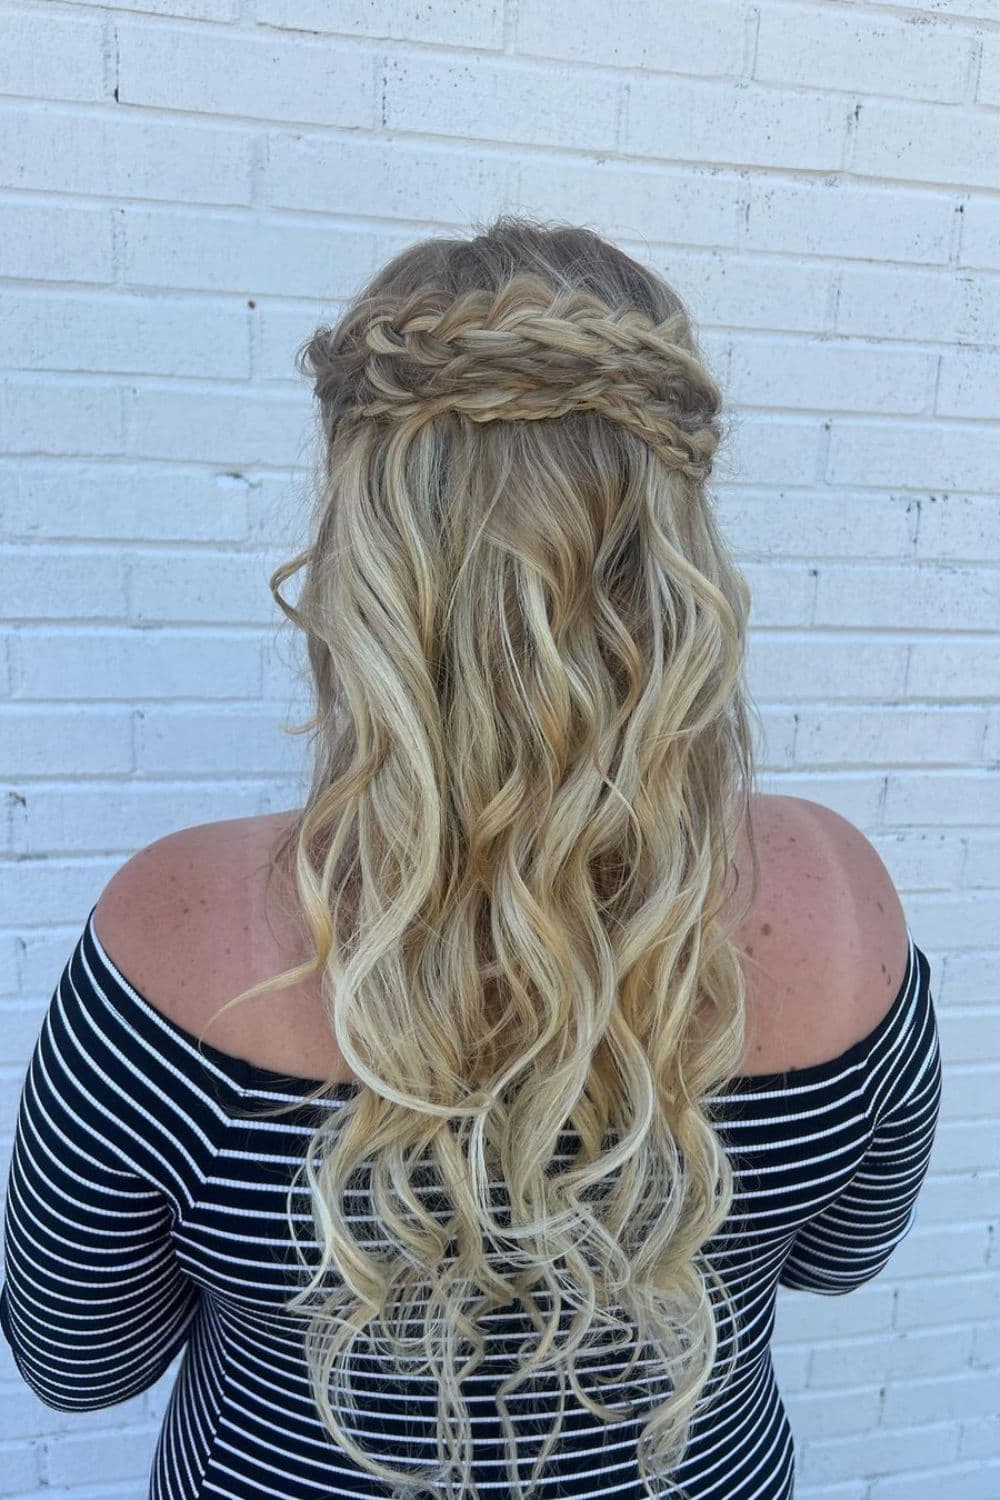 A woman with long blonde crown braid.